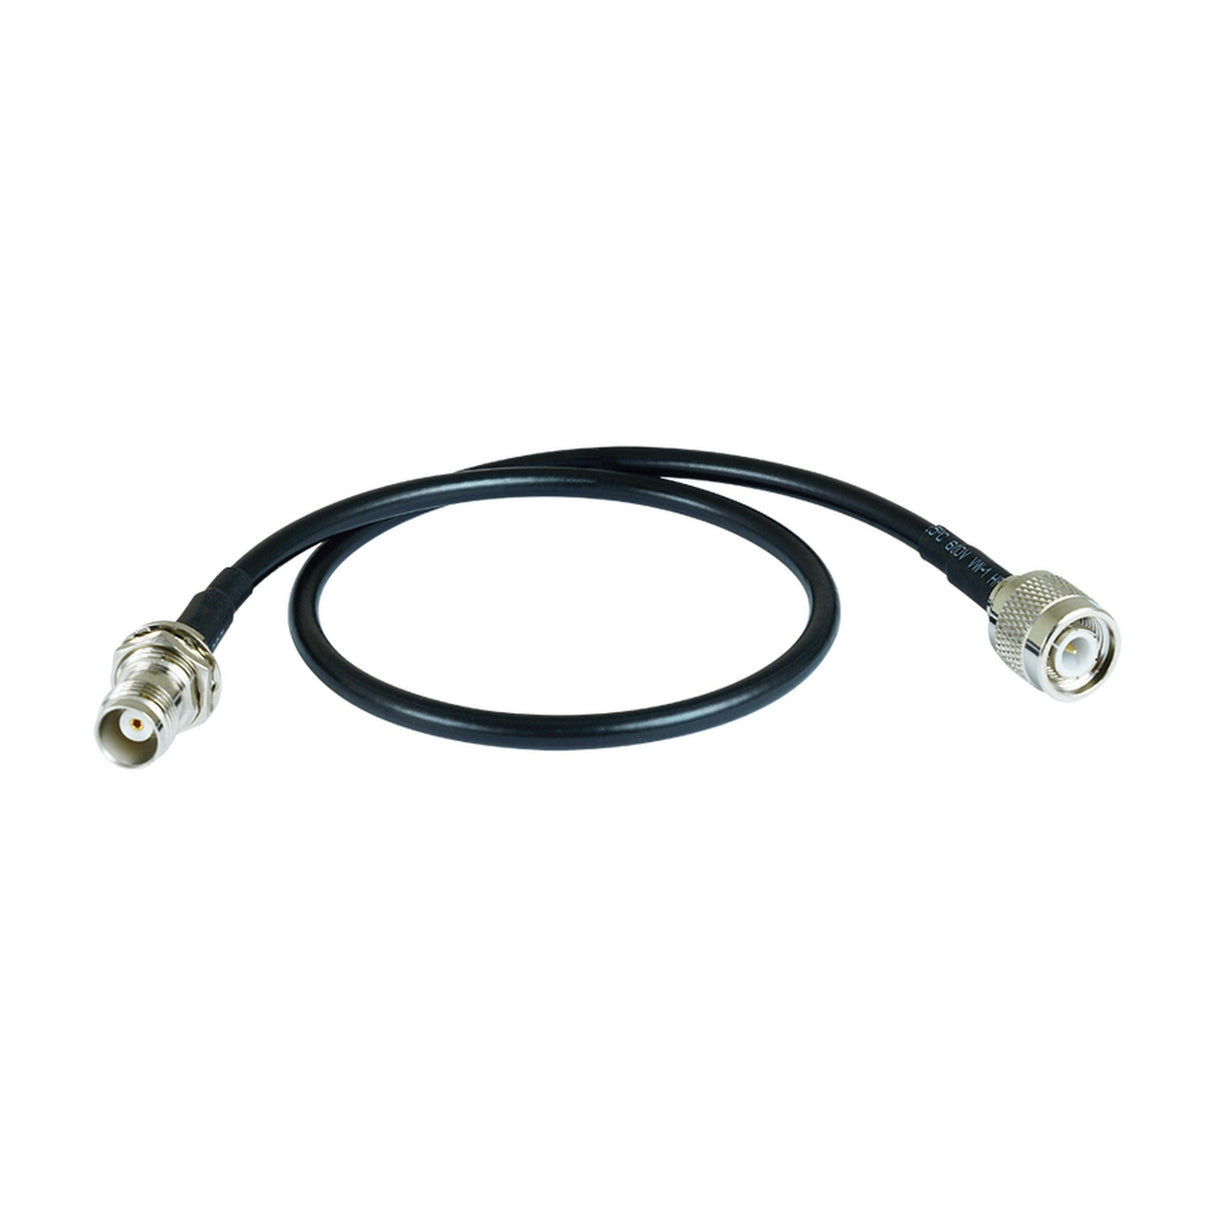 MIPRO FBC-72 Rear-to-Front Cable for MI-24T/TD, MI-58T/TD